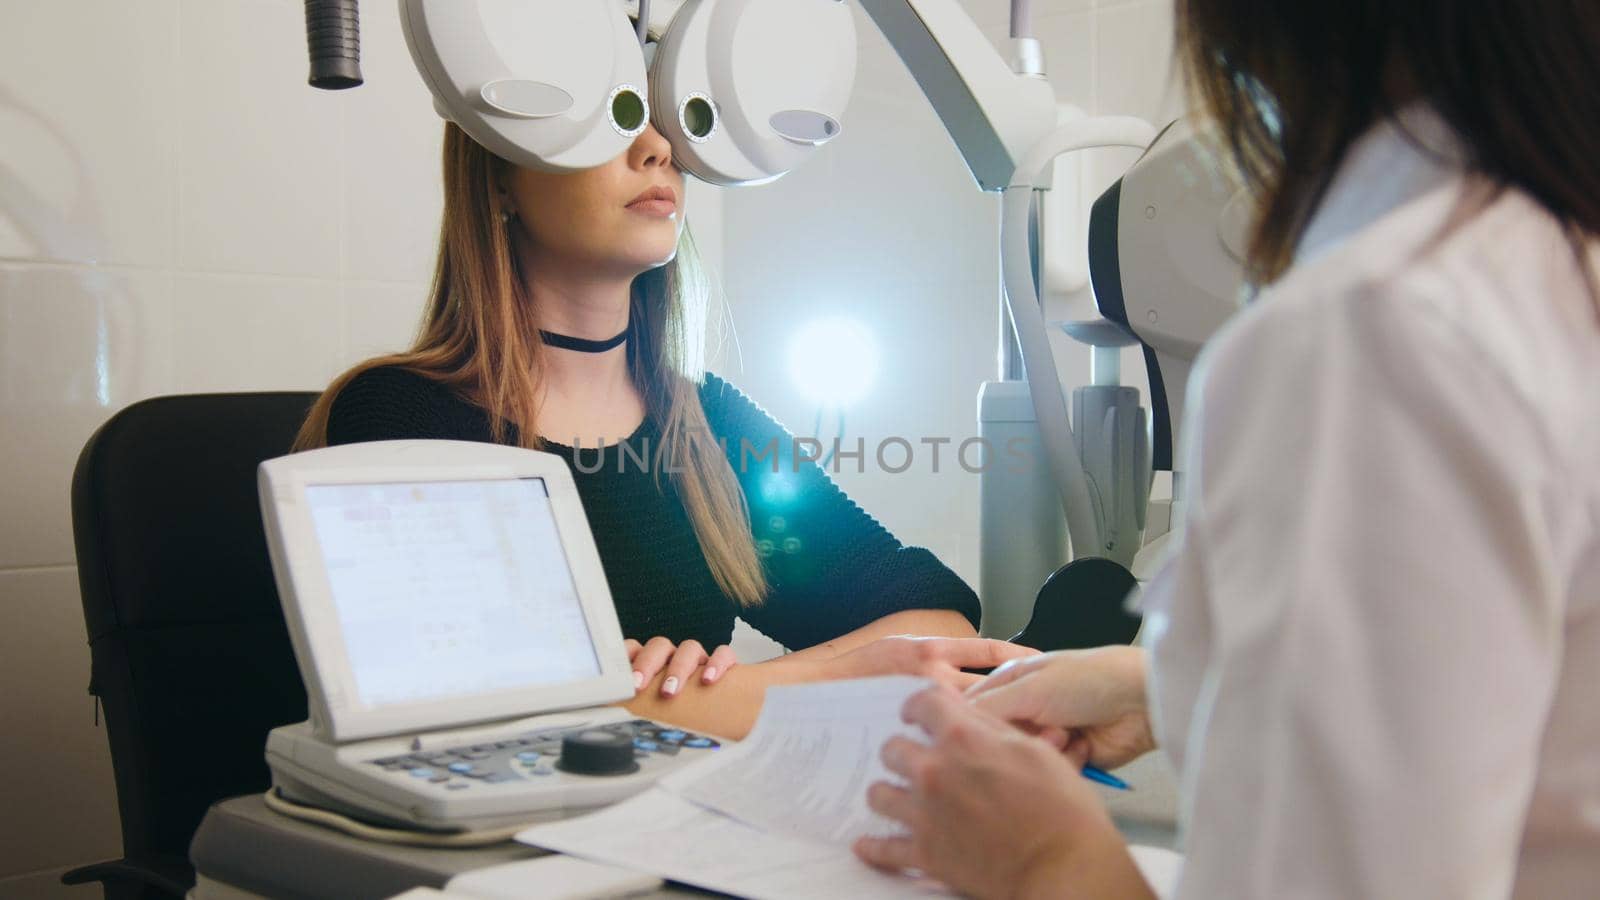 Ophthalmology - white woman checks vision in an ophthalmologist room - medicine high technology by Studia72